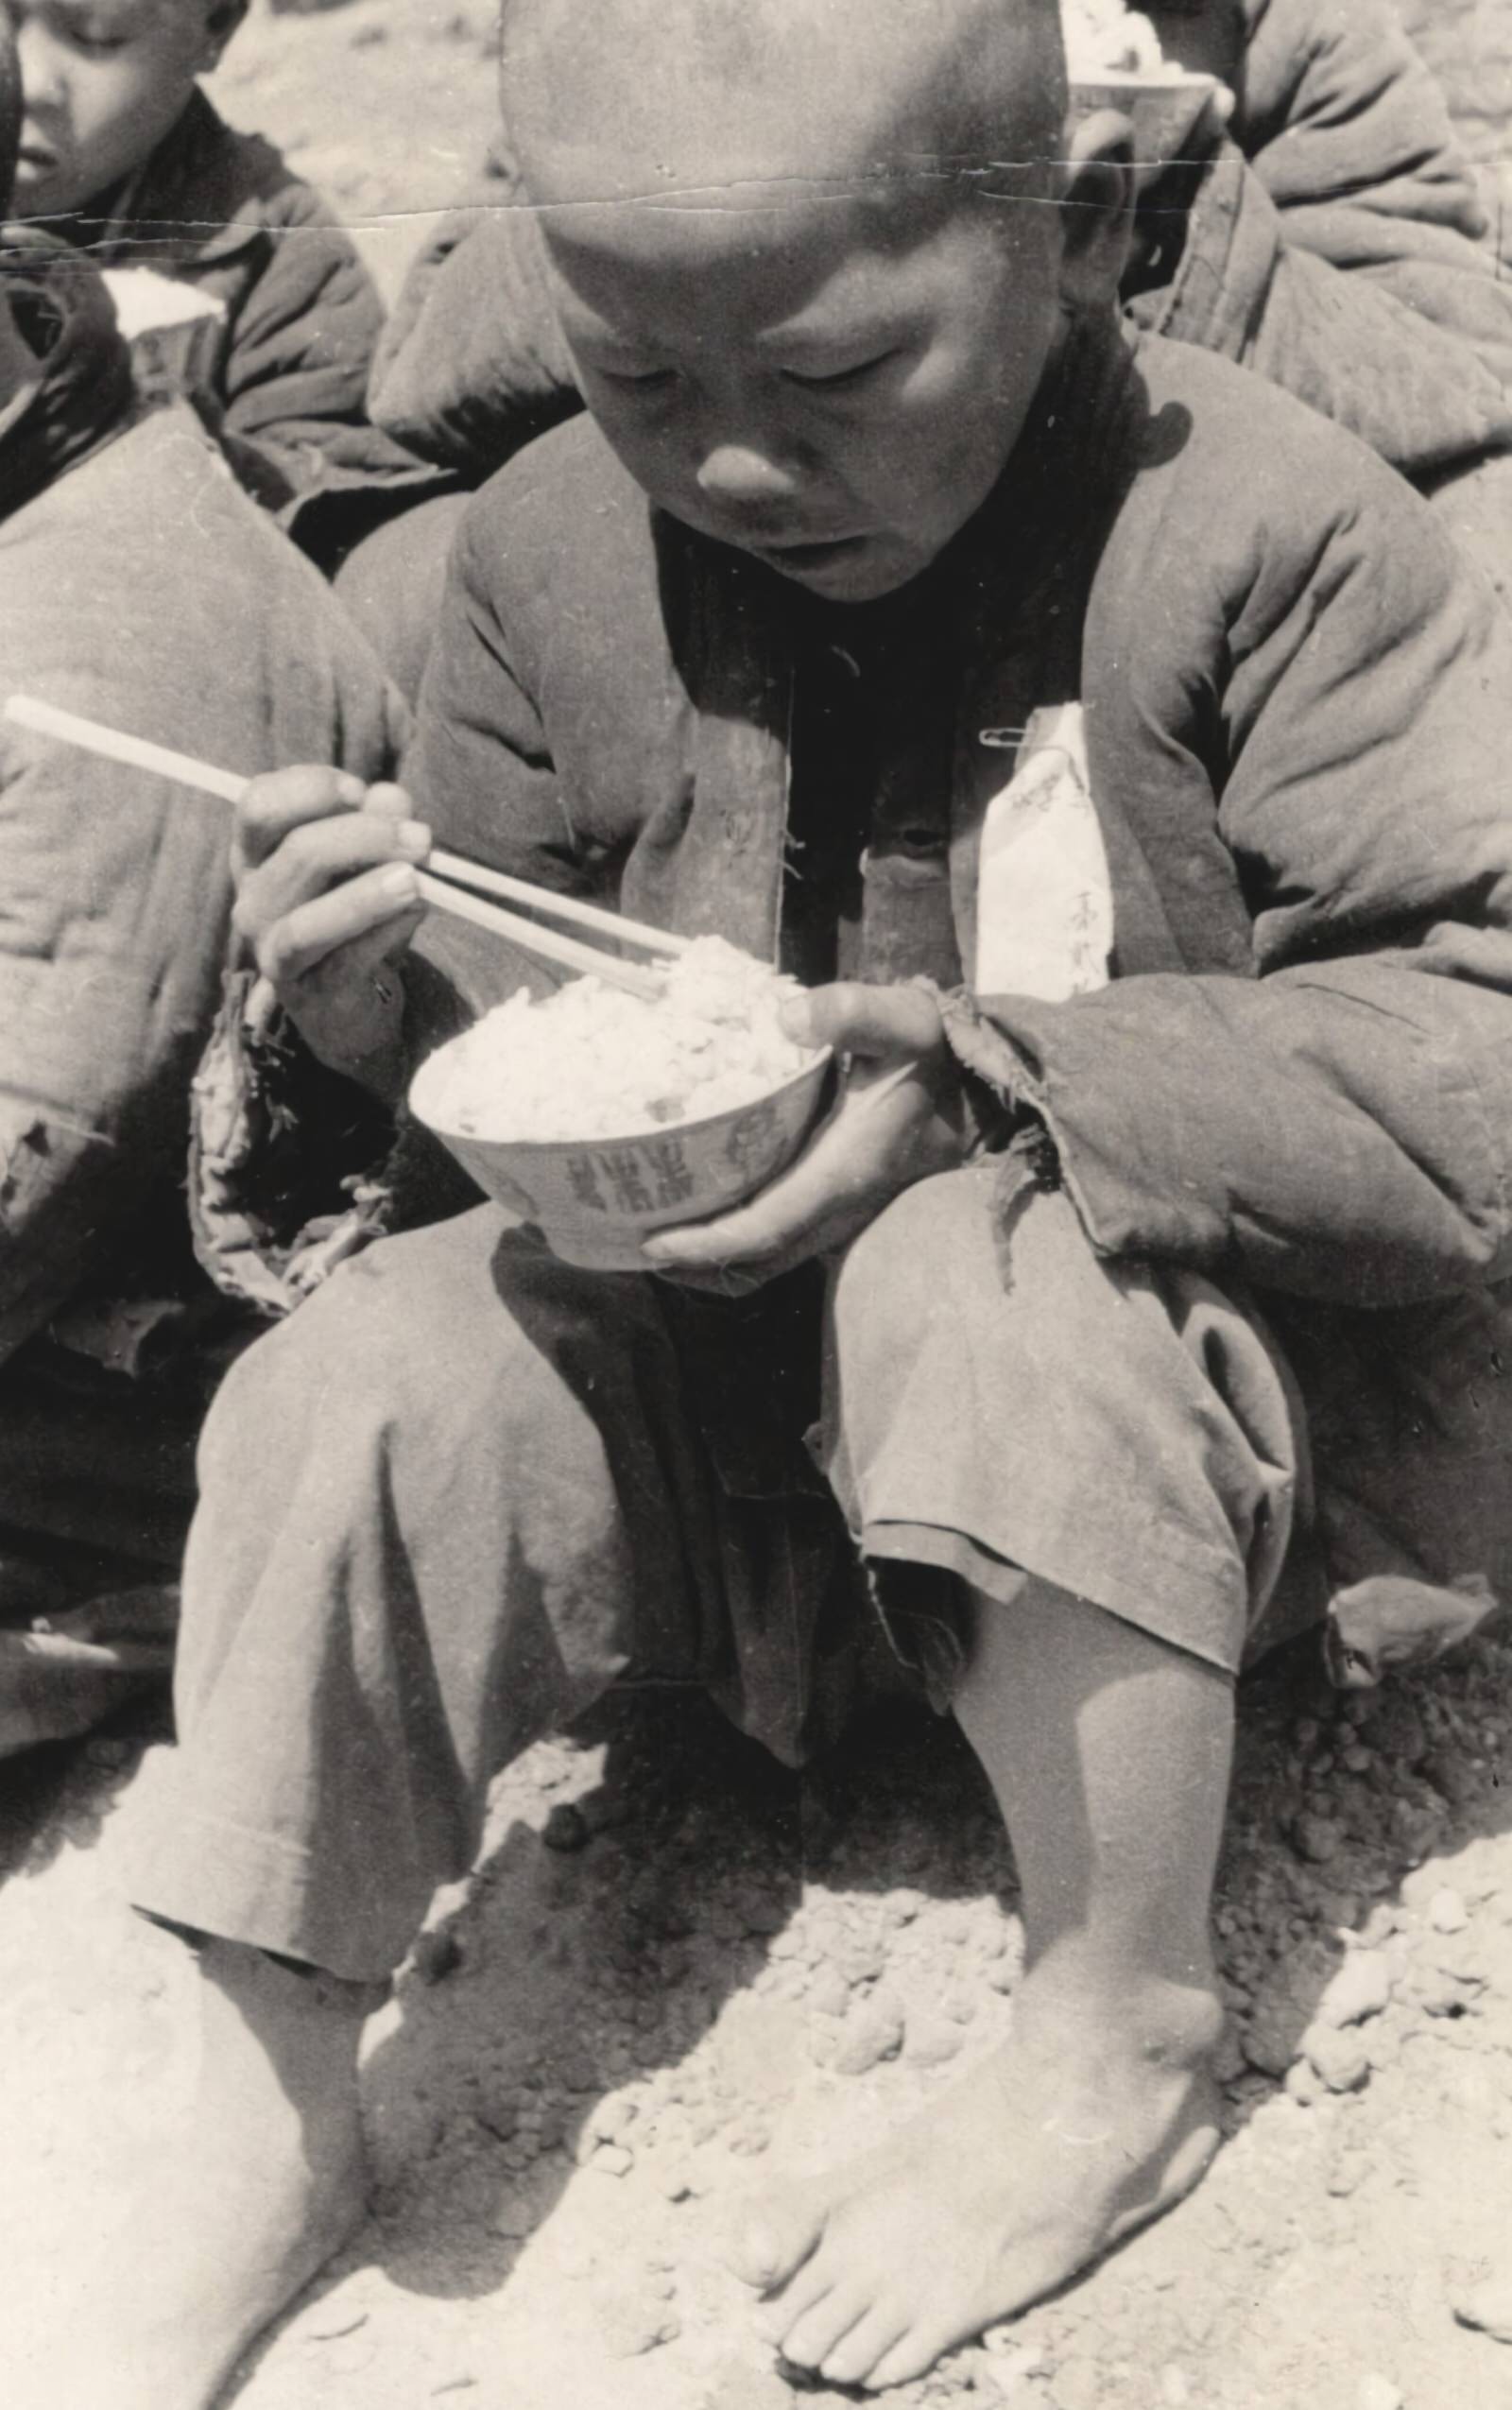 After the war-orphans had been dressed in clean new uniforms and had been bathed and shaved, they began their first regular meals. 1937-1940